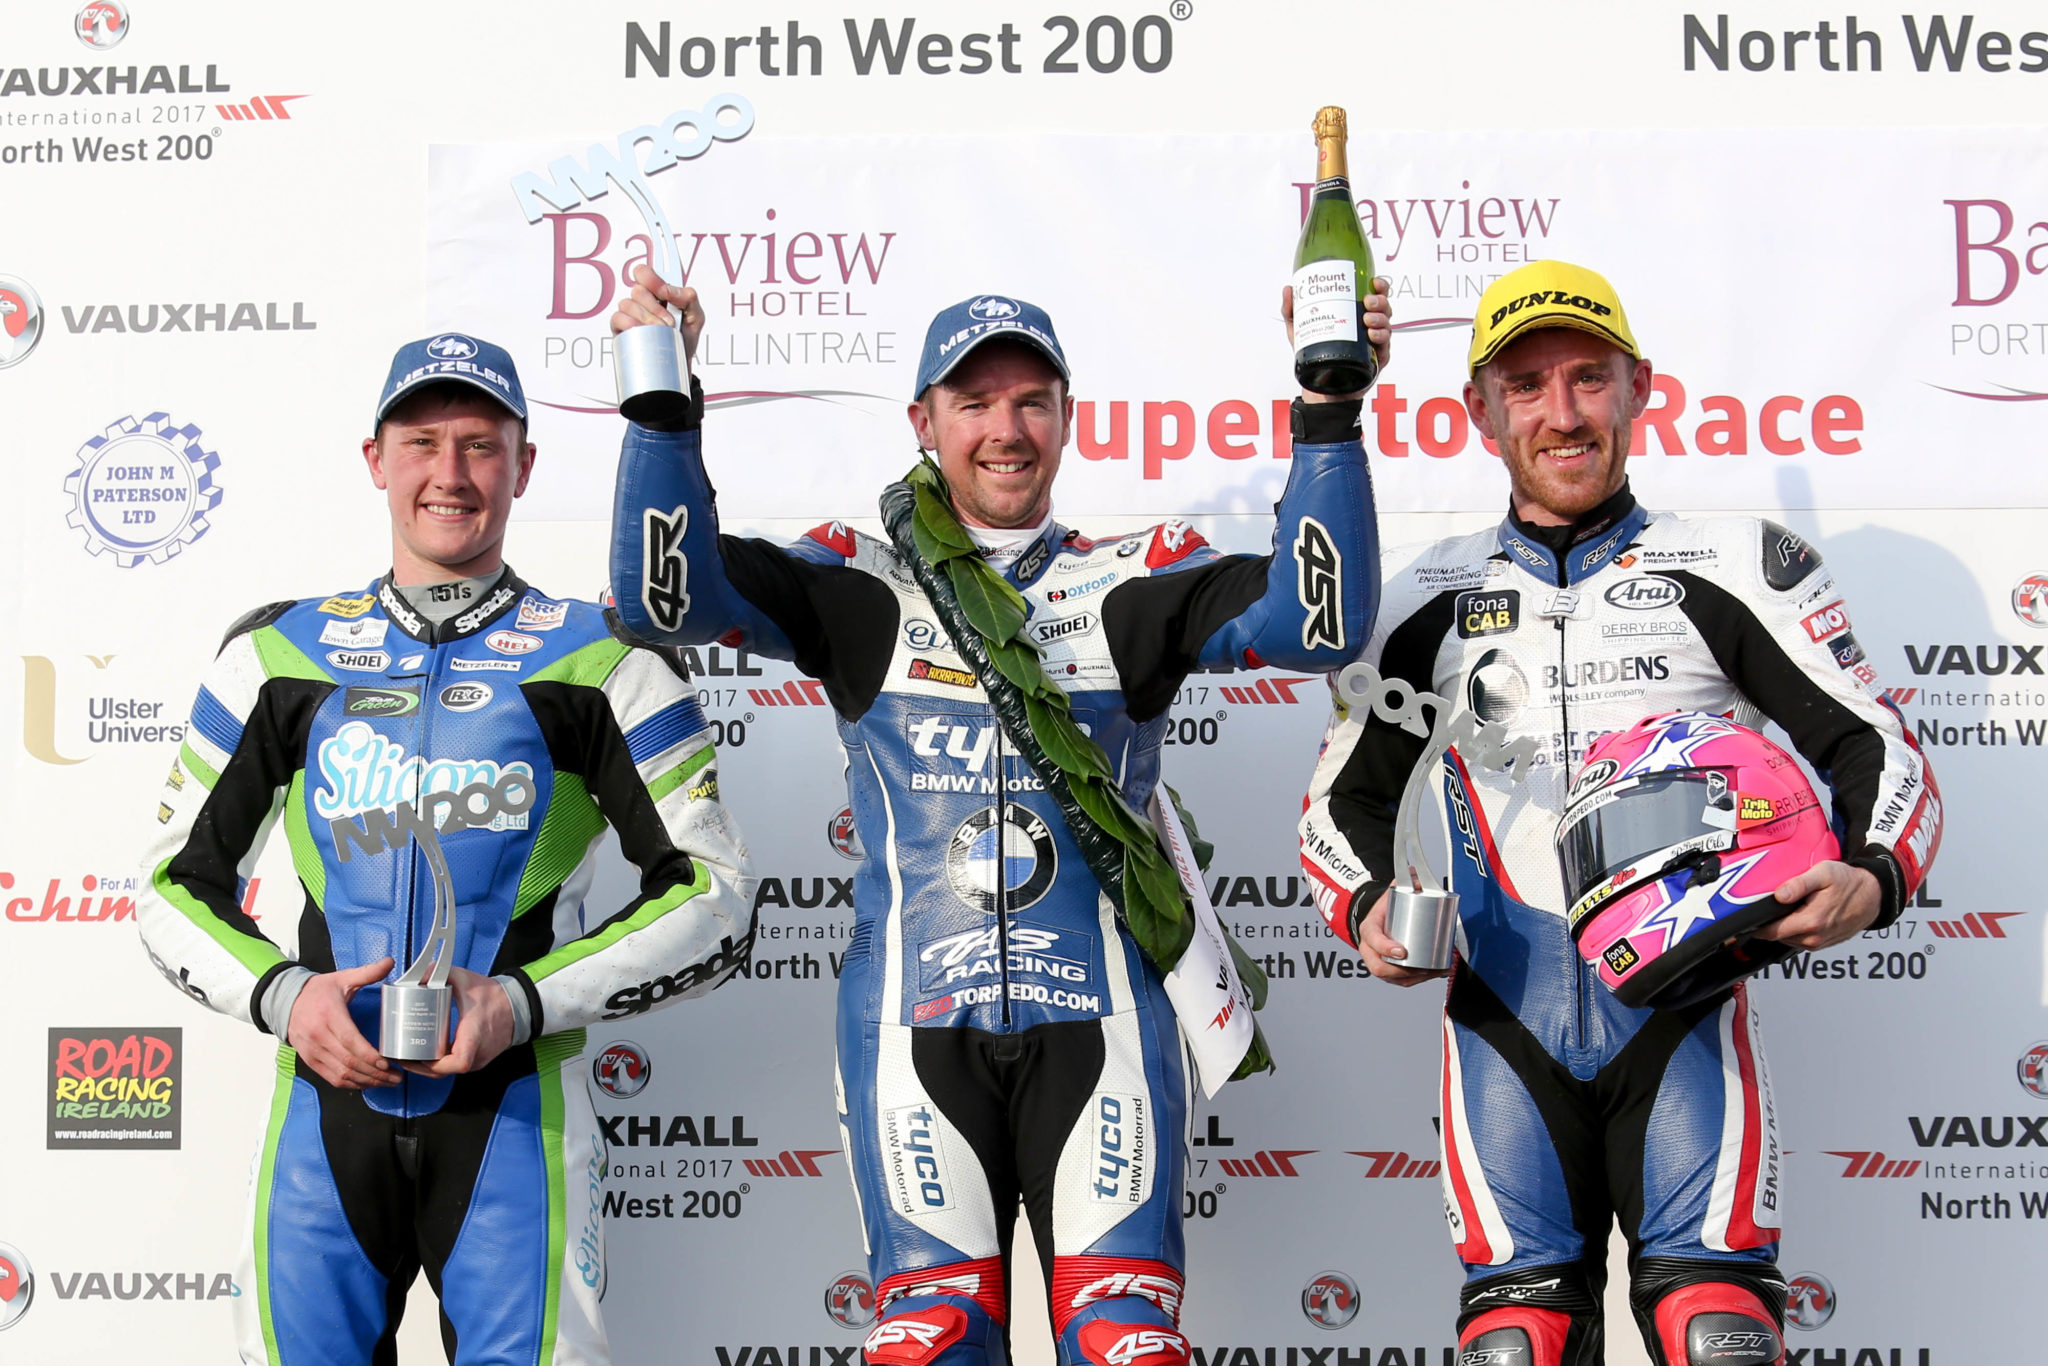 Harrison, Seeley and Johnston at North West 200 2017 credit Double Red